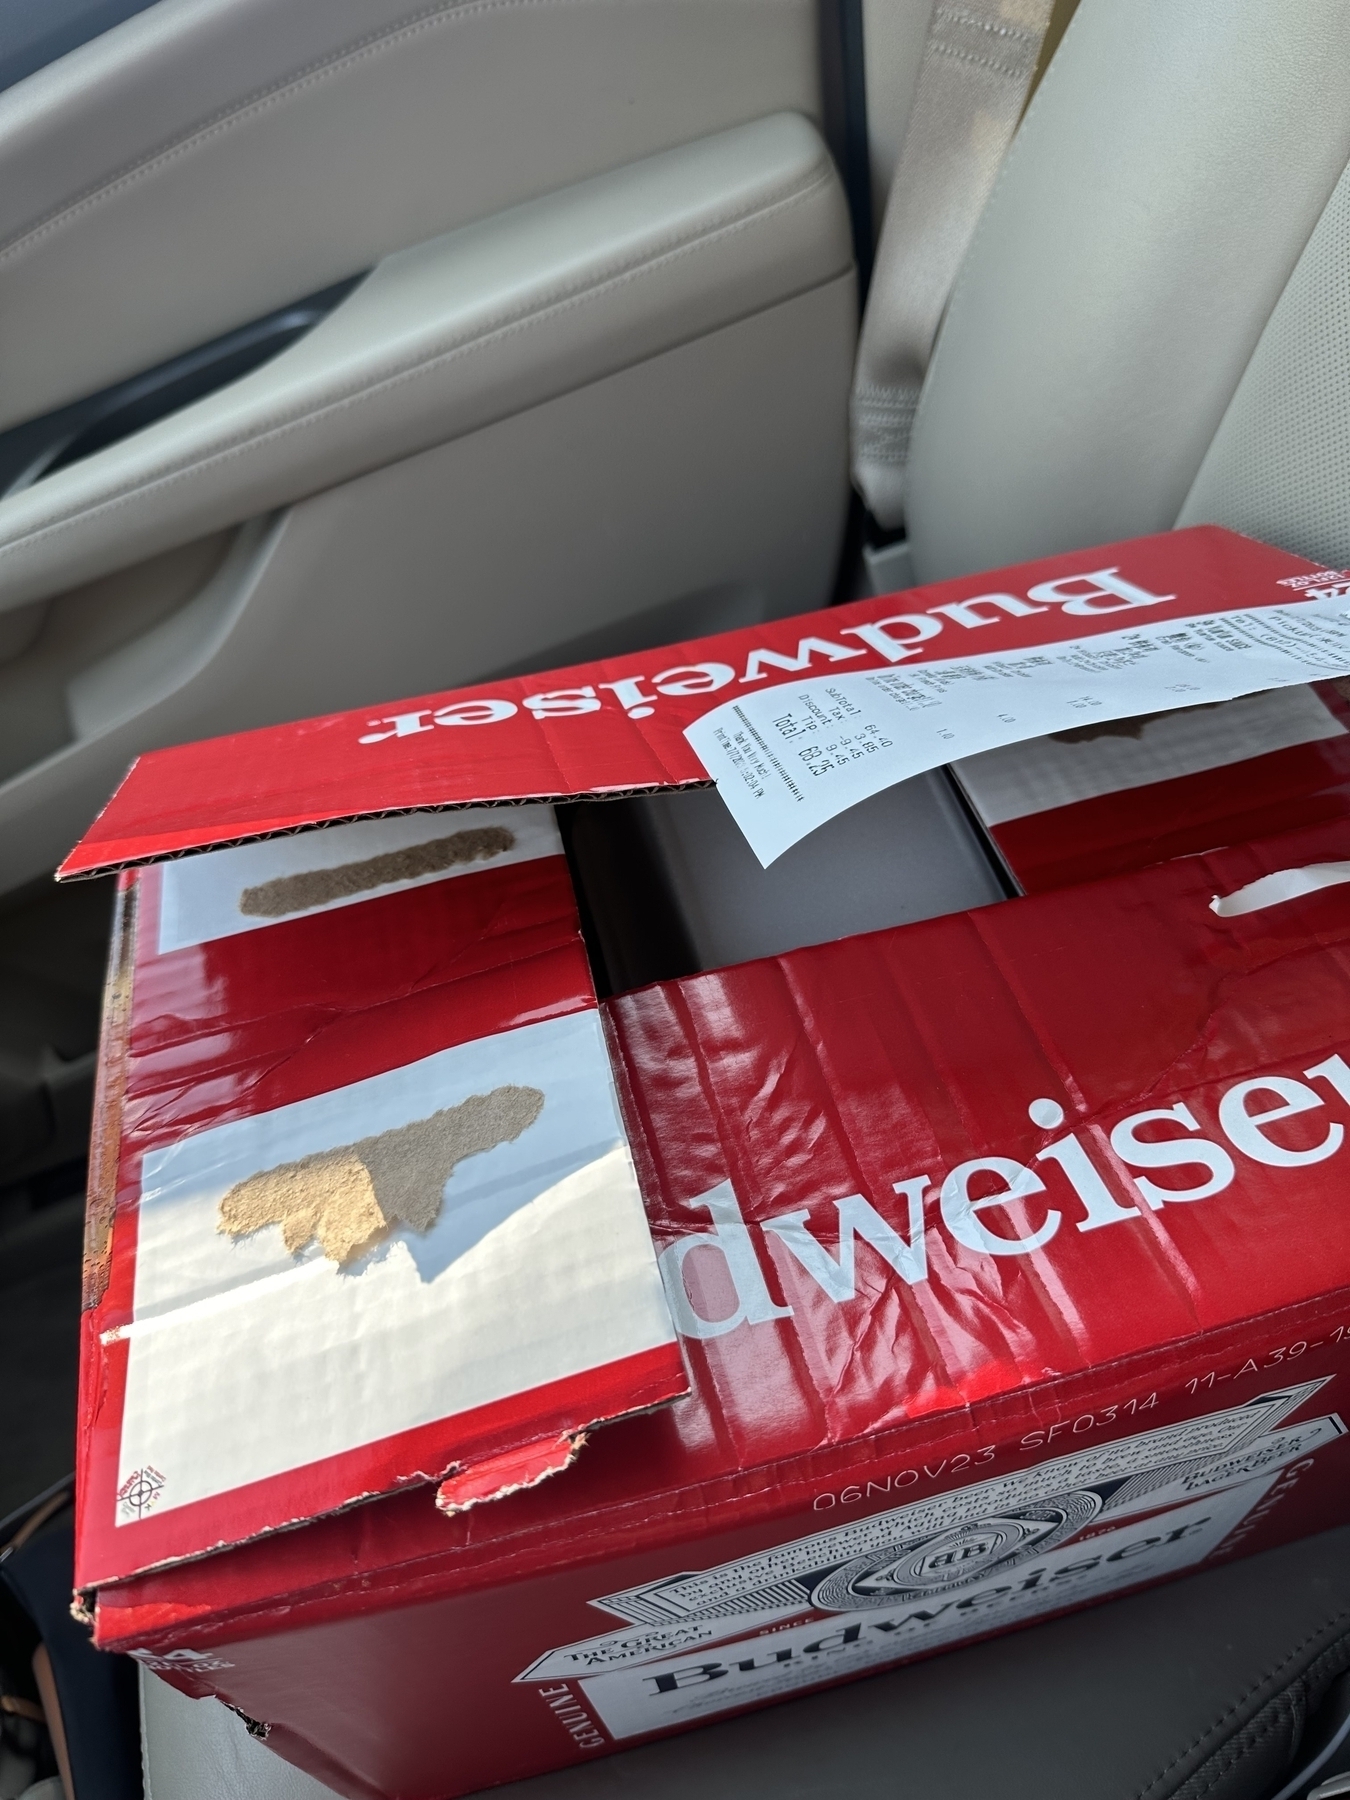 Budweiser beer bottle box re-used as takeout box. Receipt on top. 